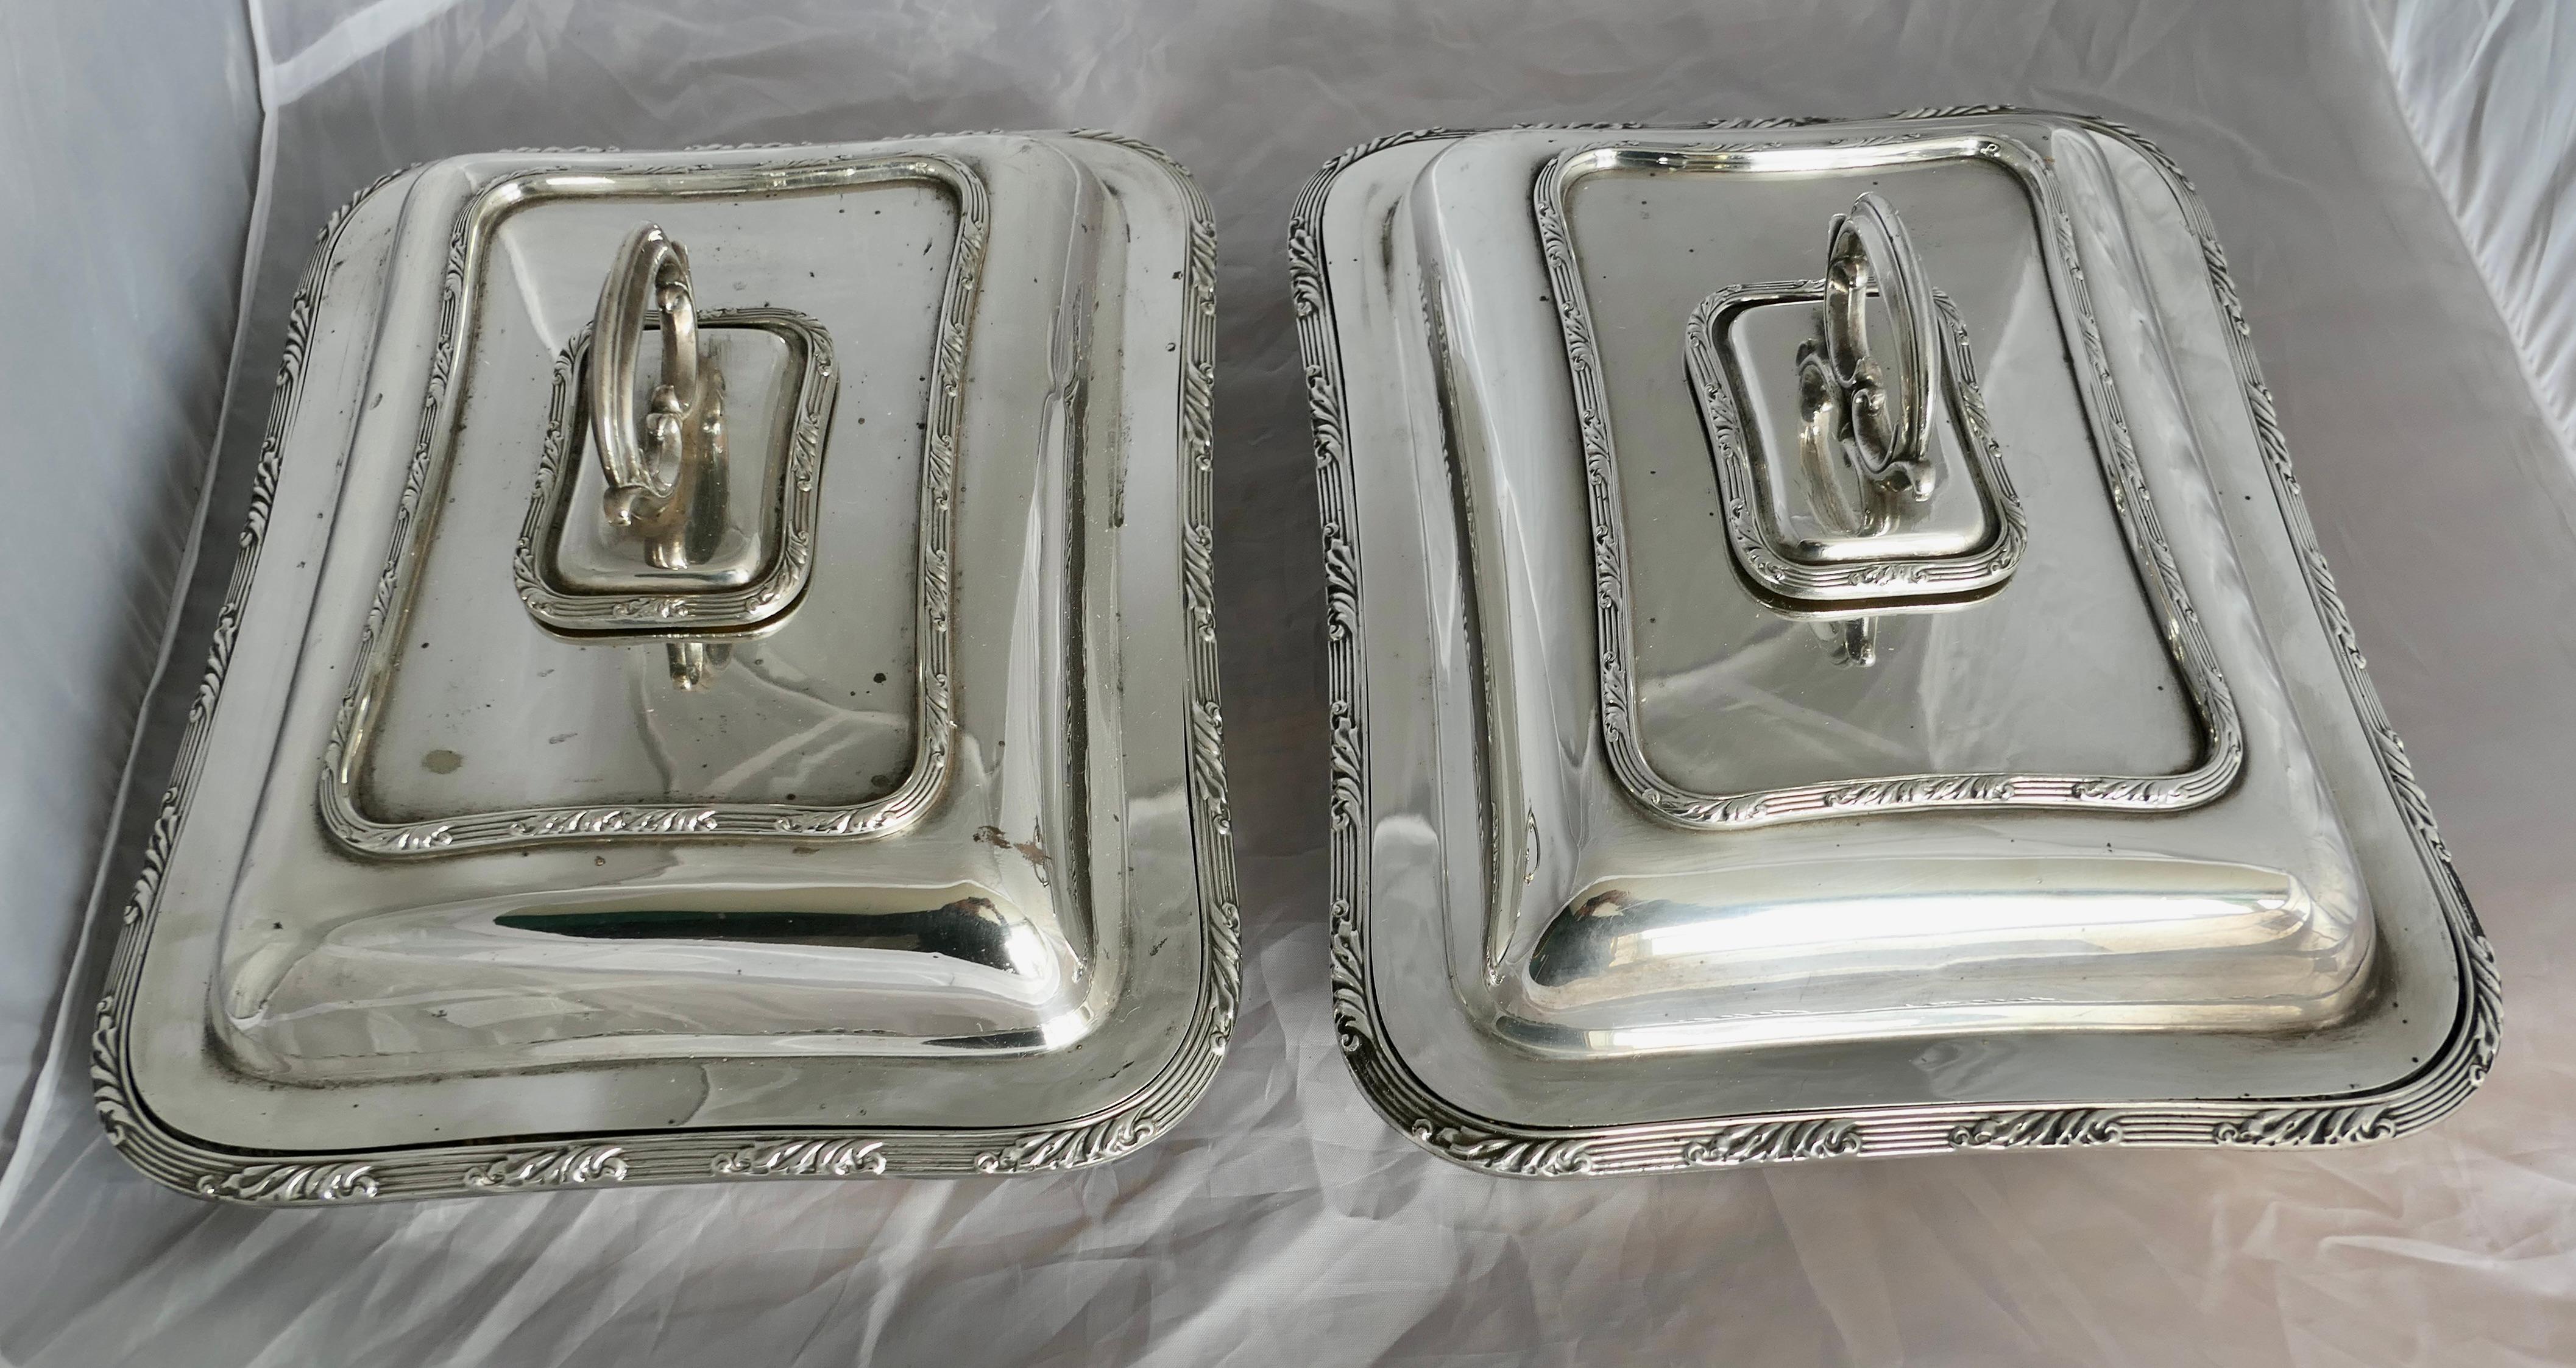 A Pair of Edwardian Silver Plated Entree Dishes by Hukin and Heath


A Pair of antique Edwardian silver plated entree dishes in quality silver plate these  rectangular entree dishes have removable lids and  handles.

The underside is fully marked